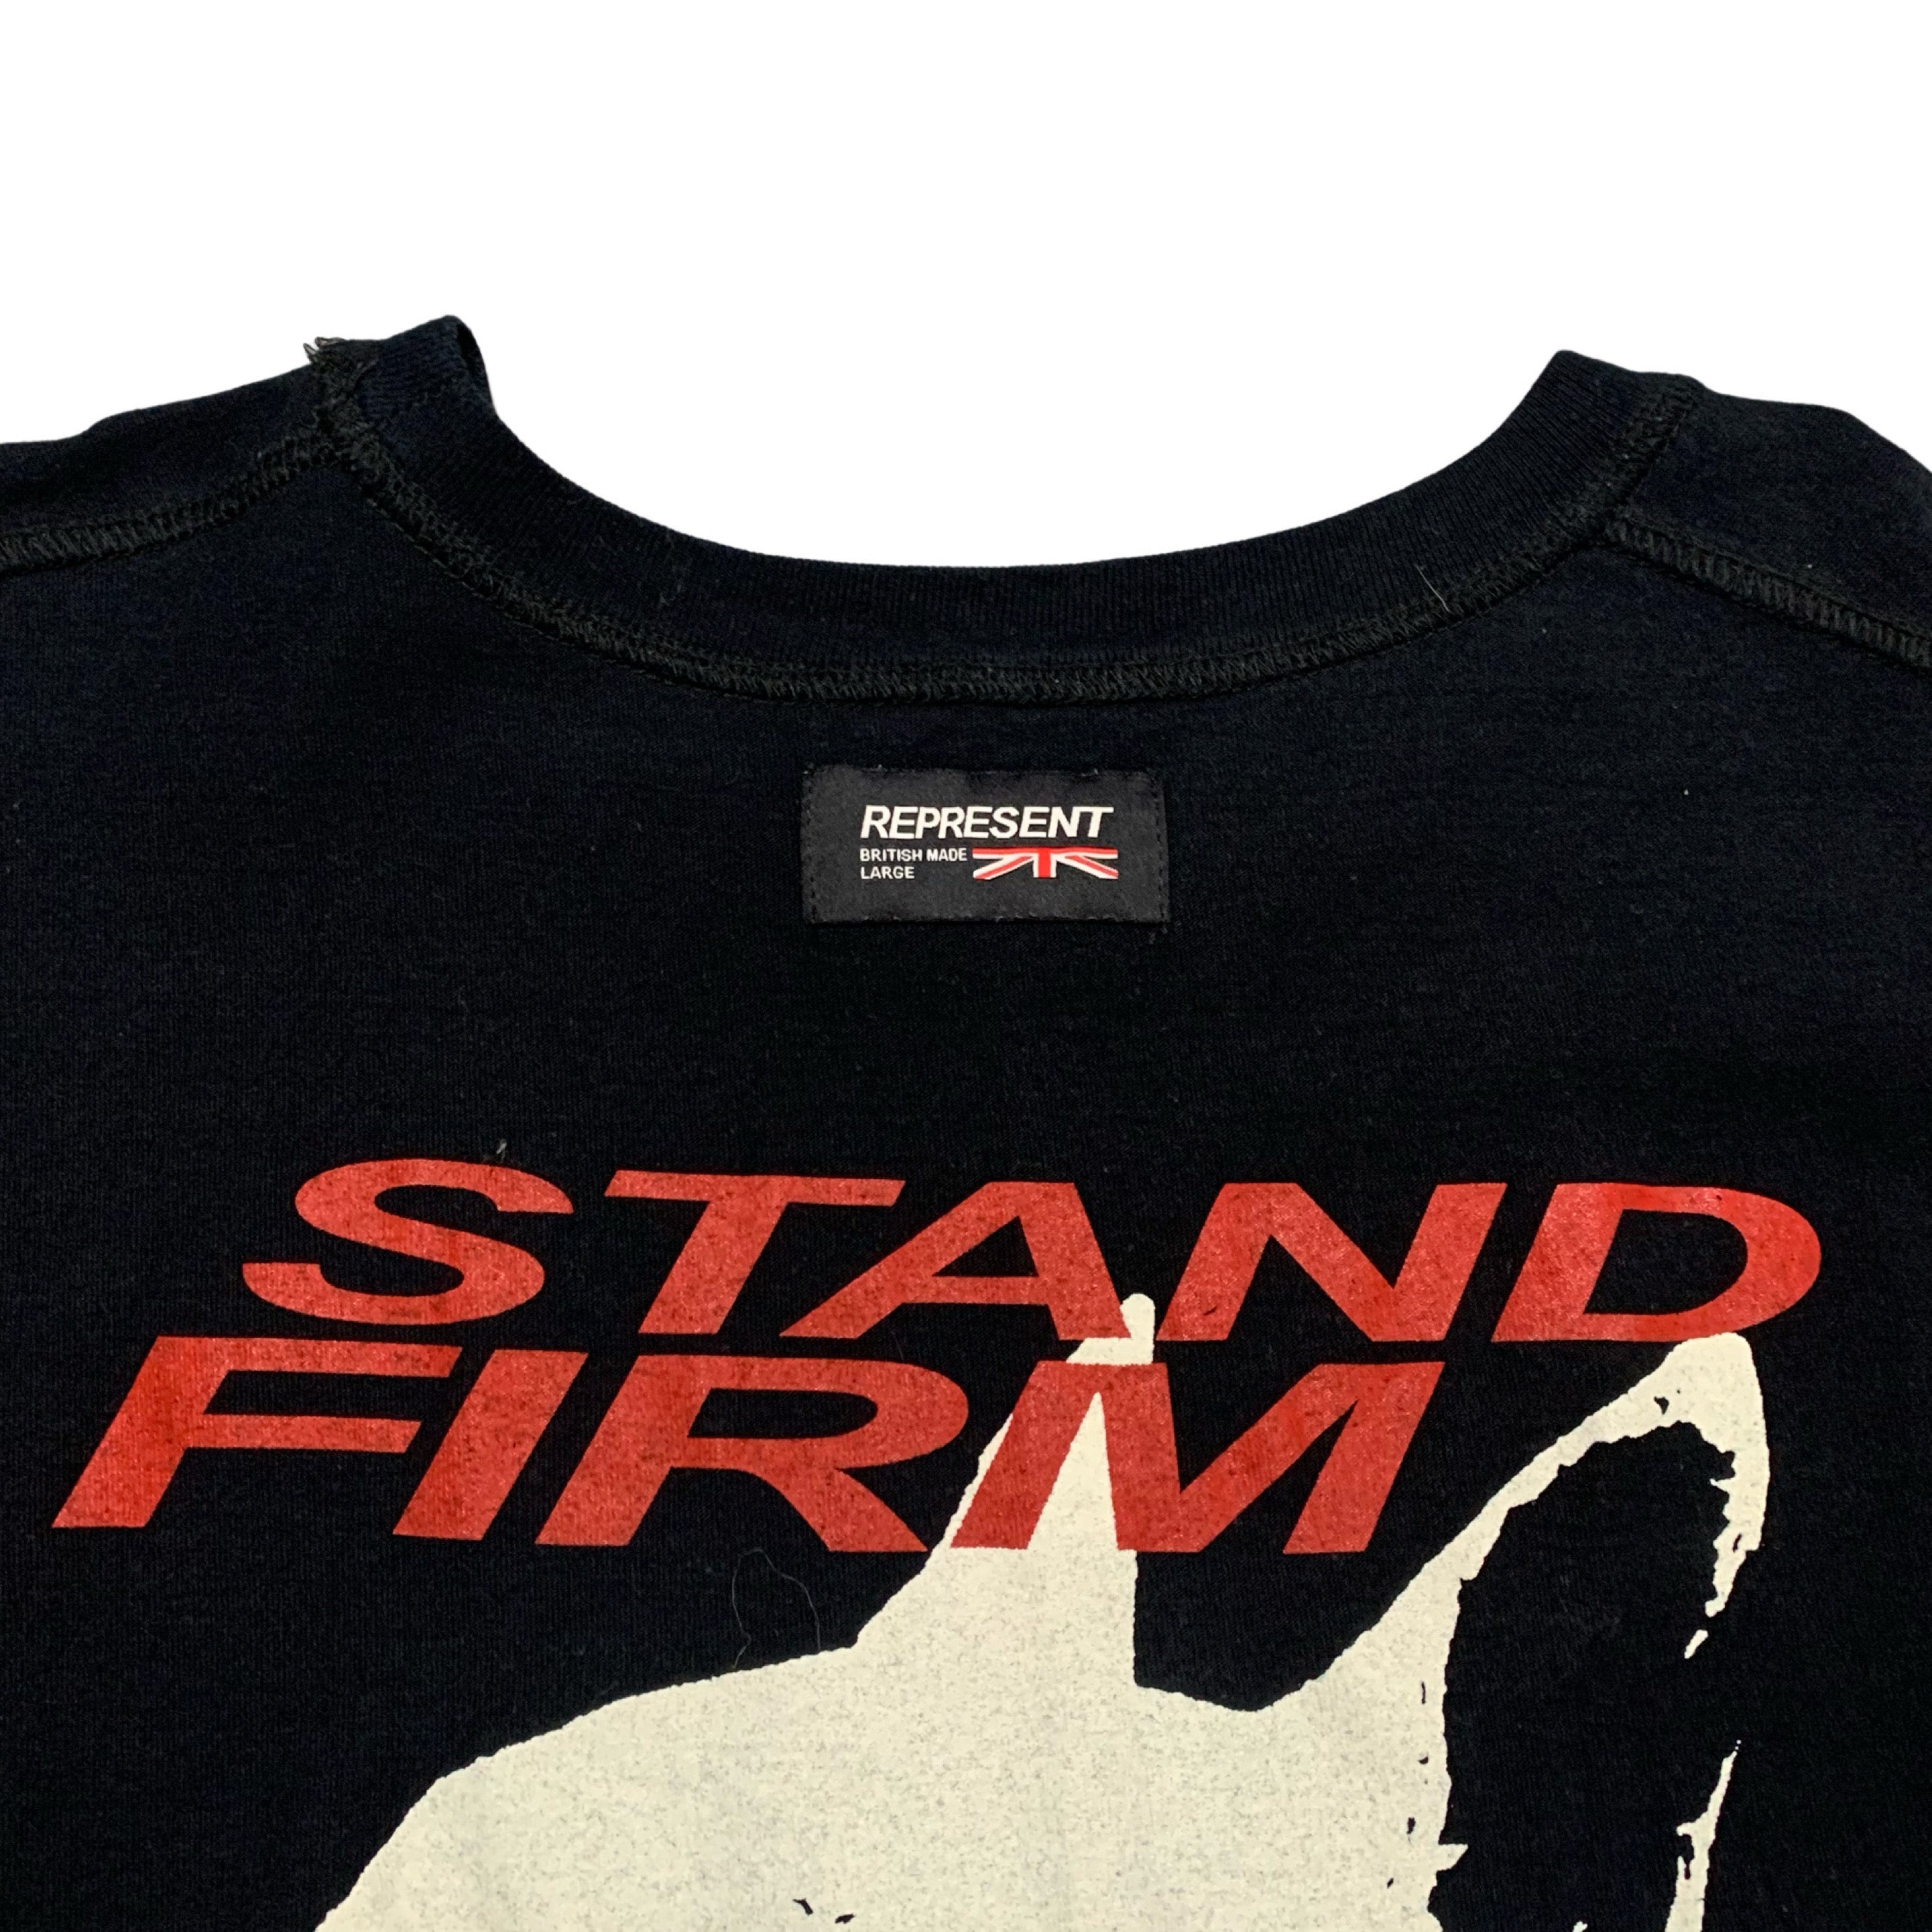 Represent Large Stand Firm Tour Black Tee